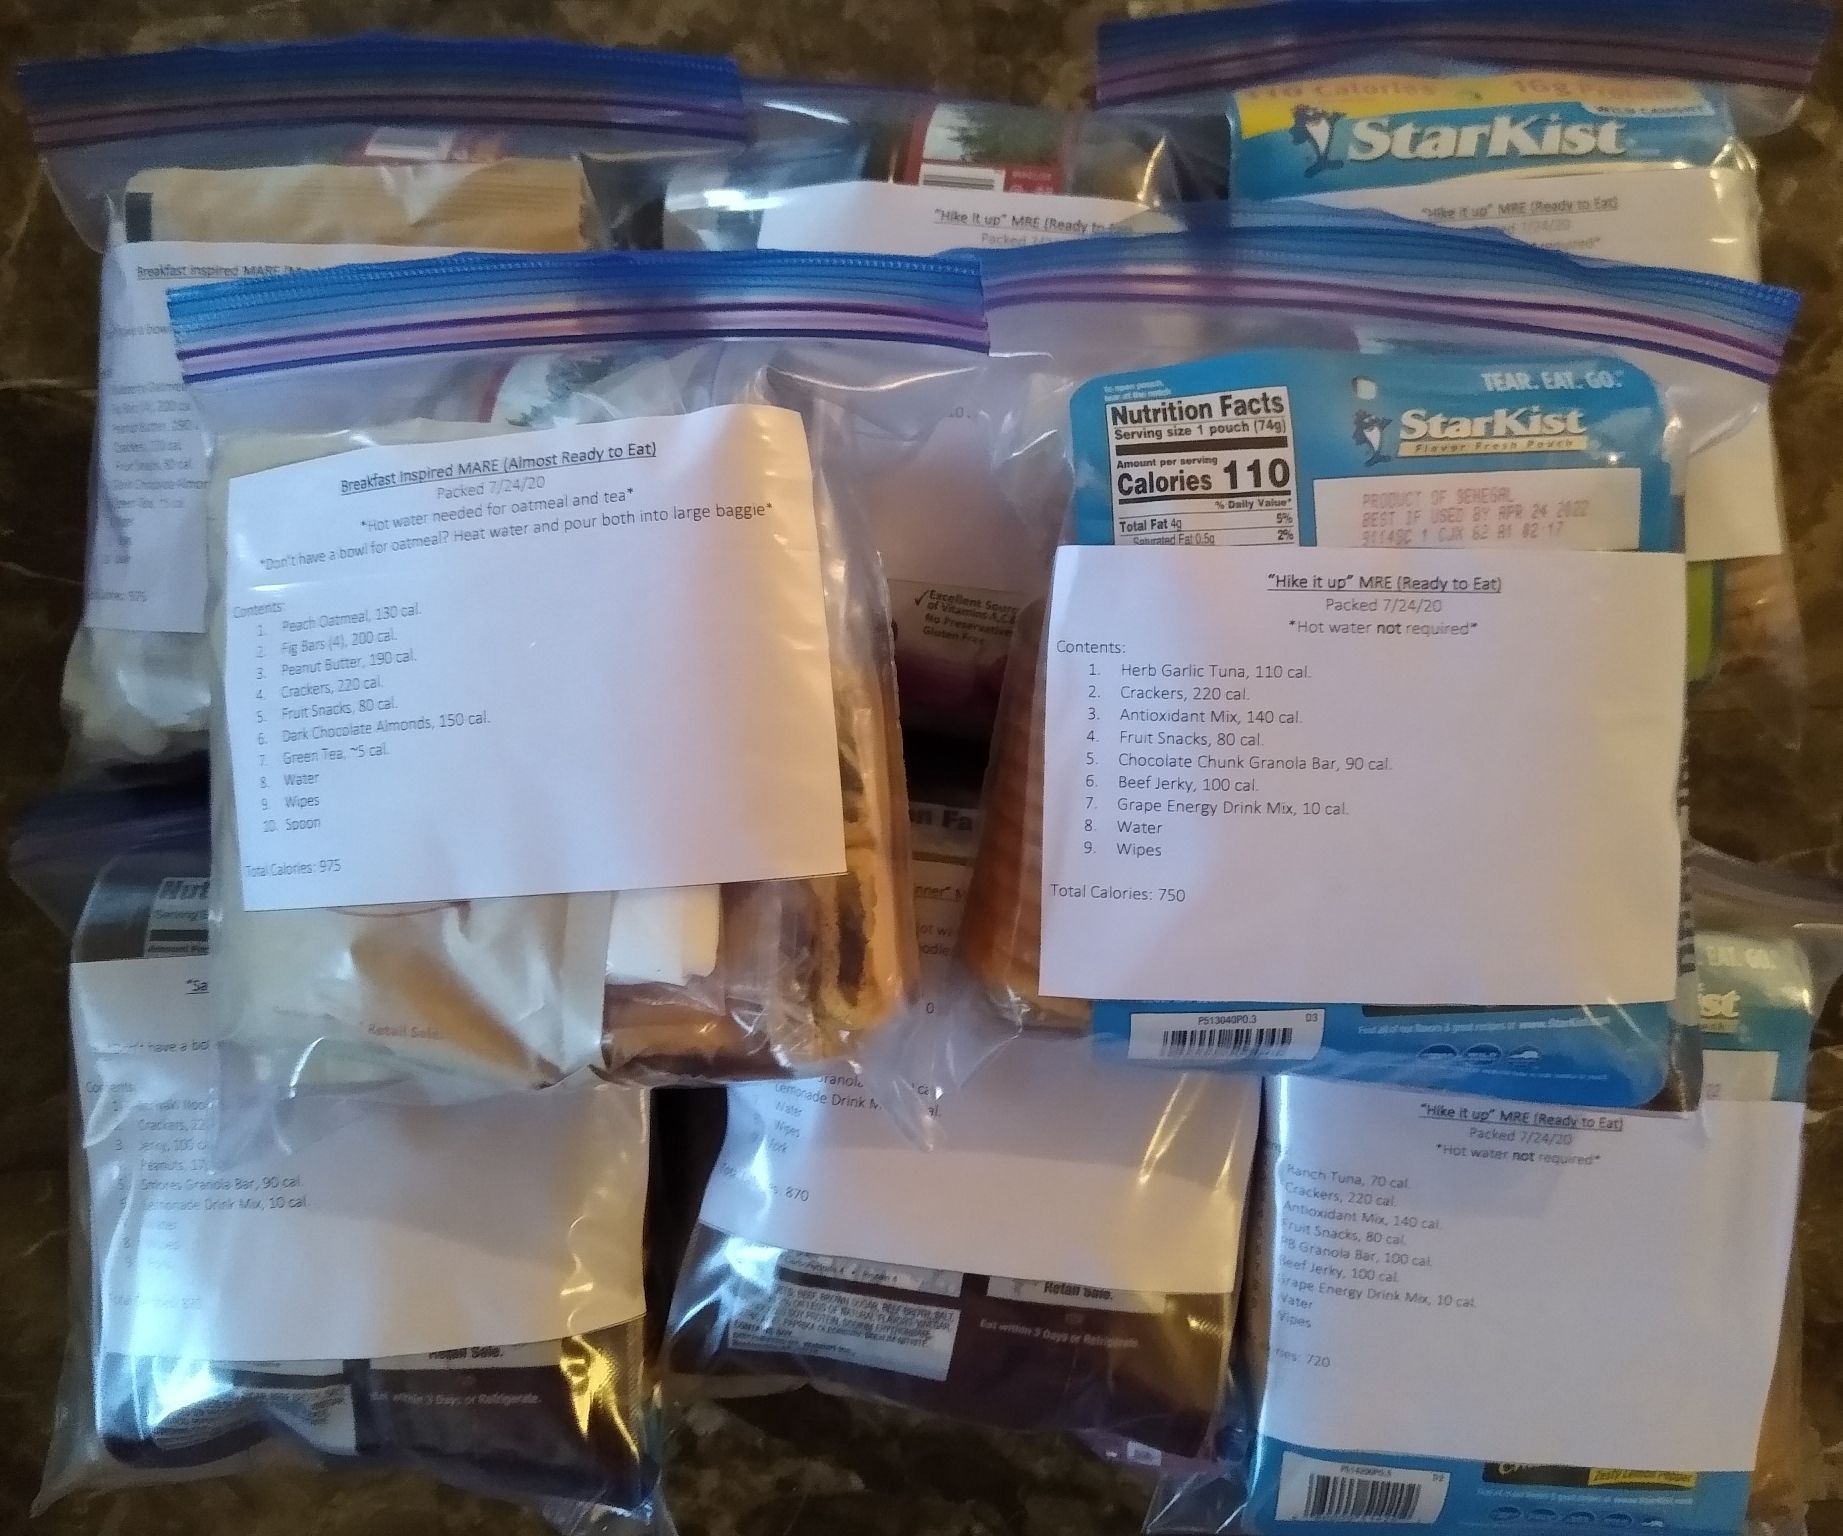 DIY Compact MREs (Meals Ready to Eat)